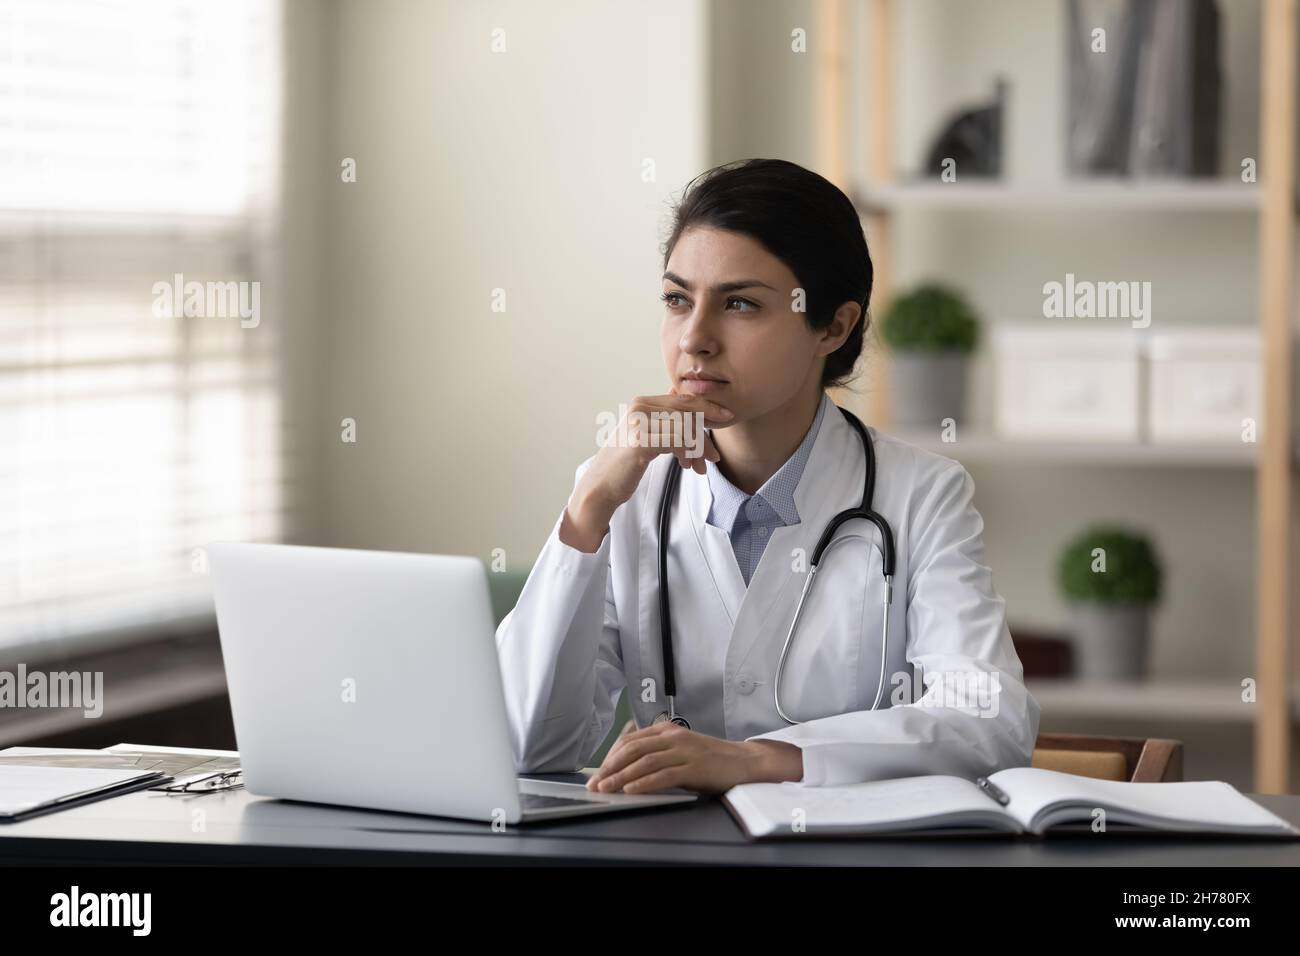 Thoughtful serious Indian female doctor physician sitting at work desk Stock Photo